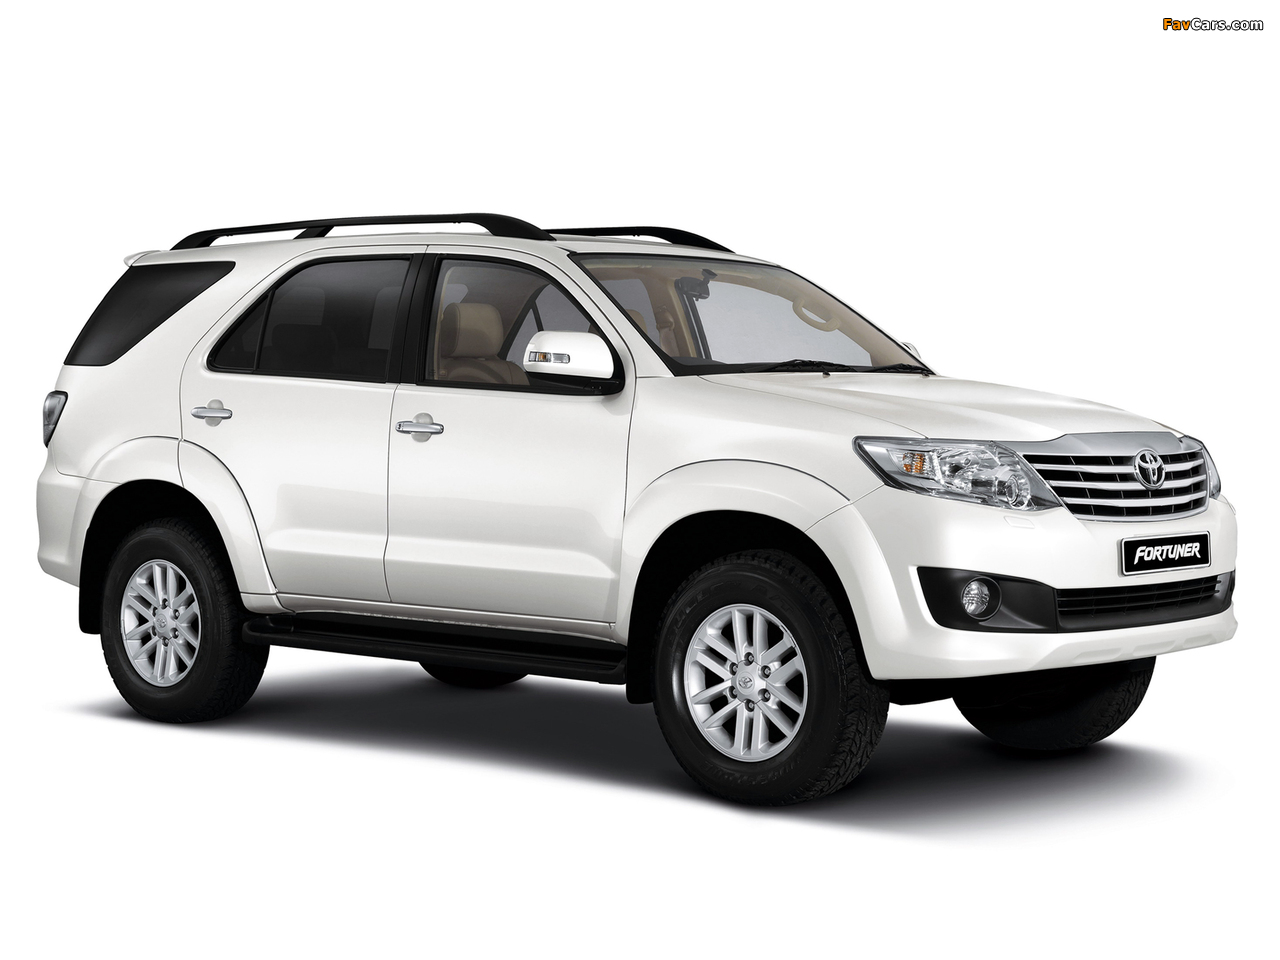 Pictures of Toyota Fortuner ZA-spec 2011 (1280x960)